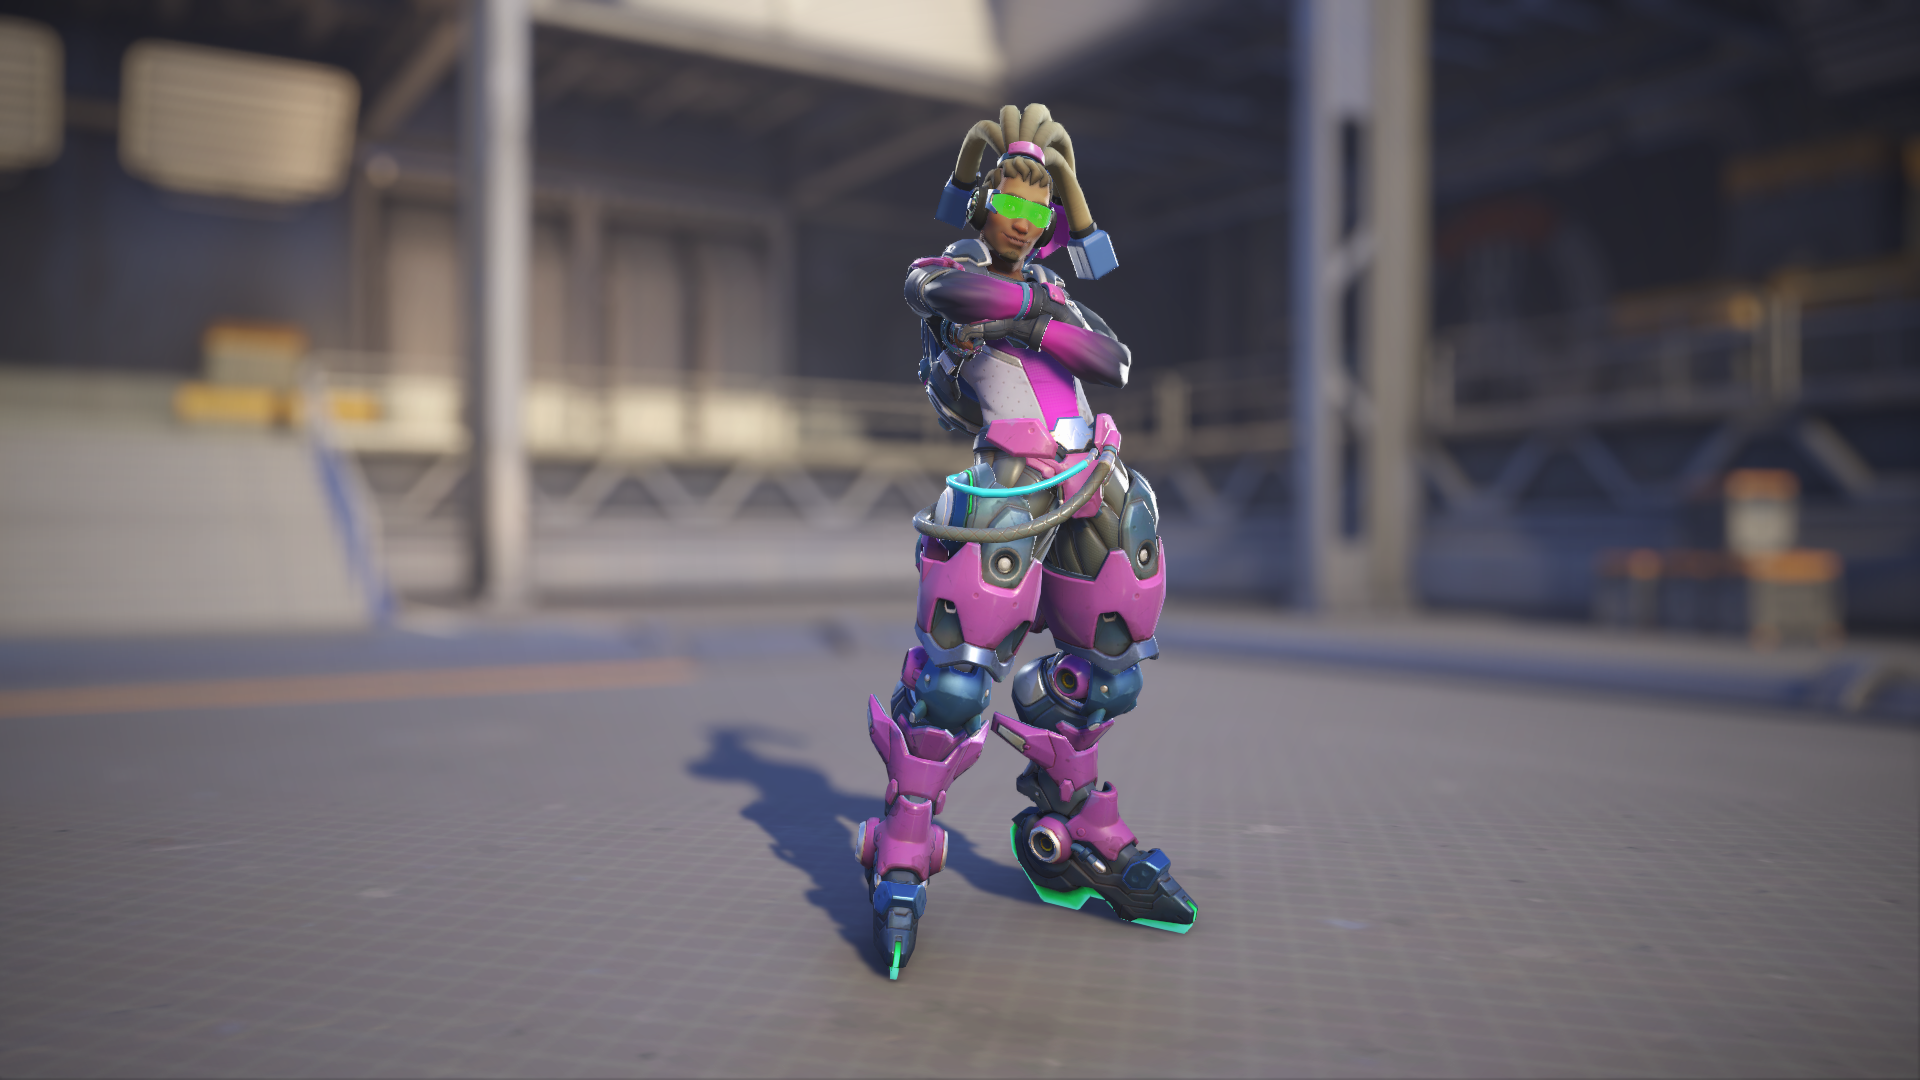 Lúcio models his Bitrate skin in Overwatch 2.